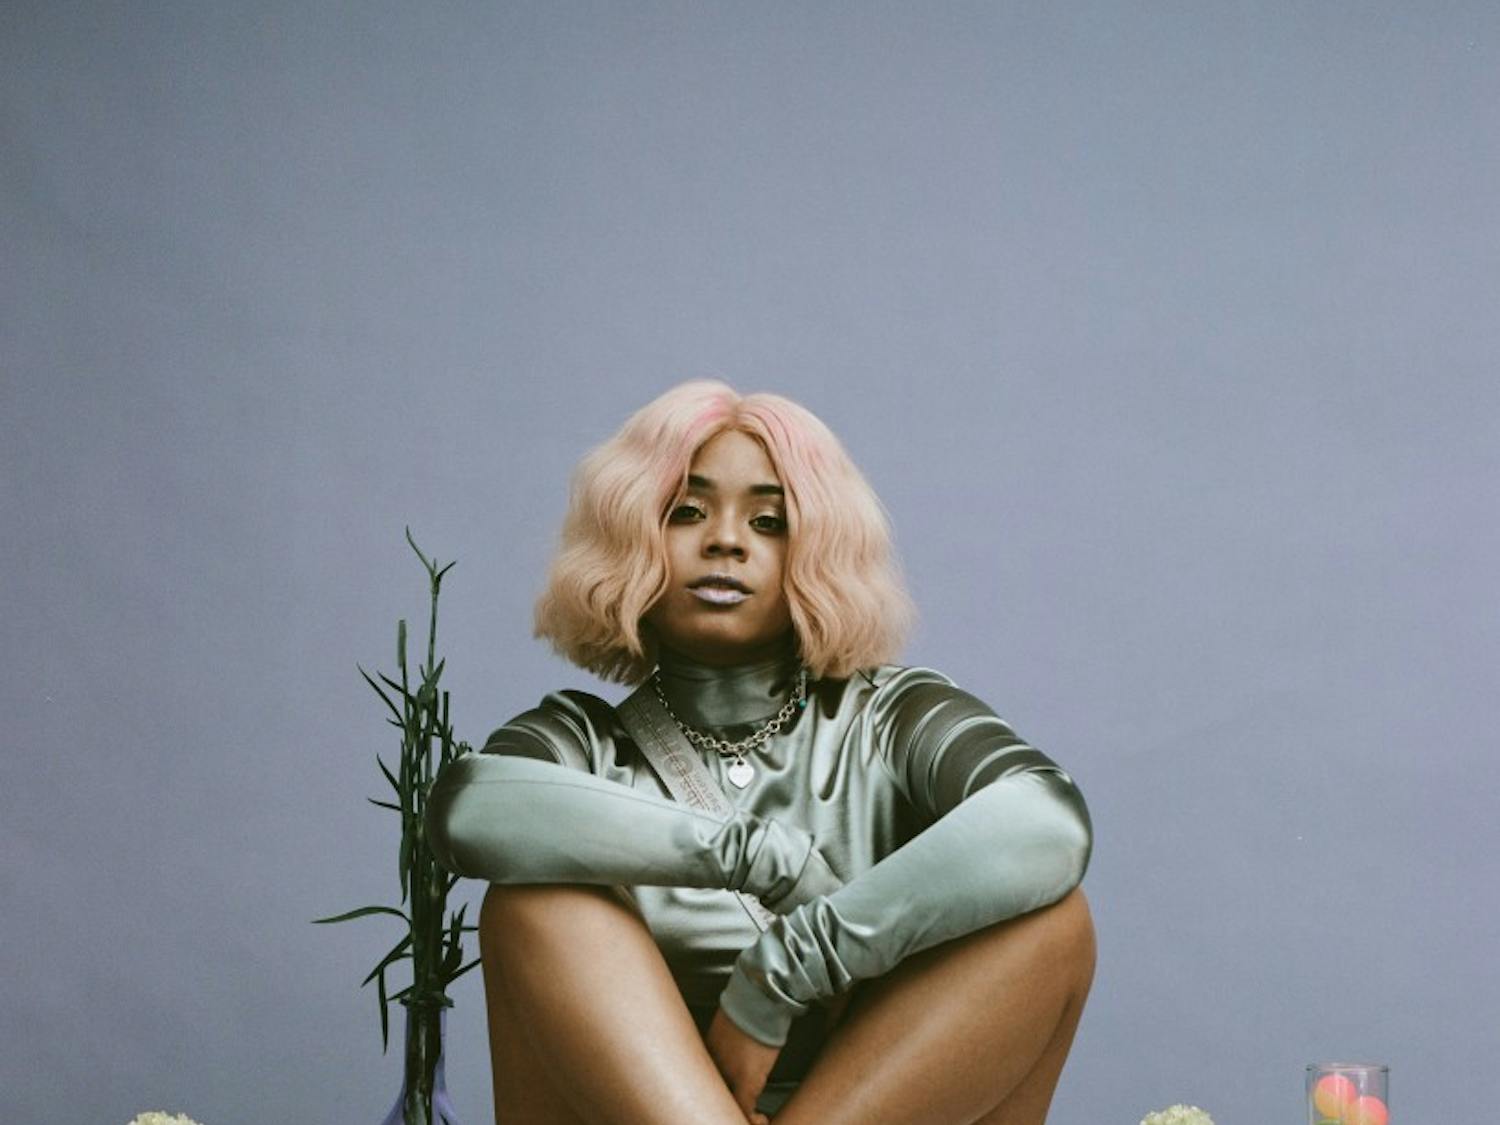 Musician Tayla Parx is responsible for penning some of the biggest hits of 2018 and 2019. Parx drops her new album “We Need to Talk” on Friday.